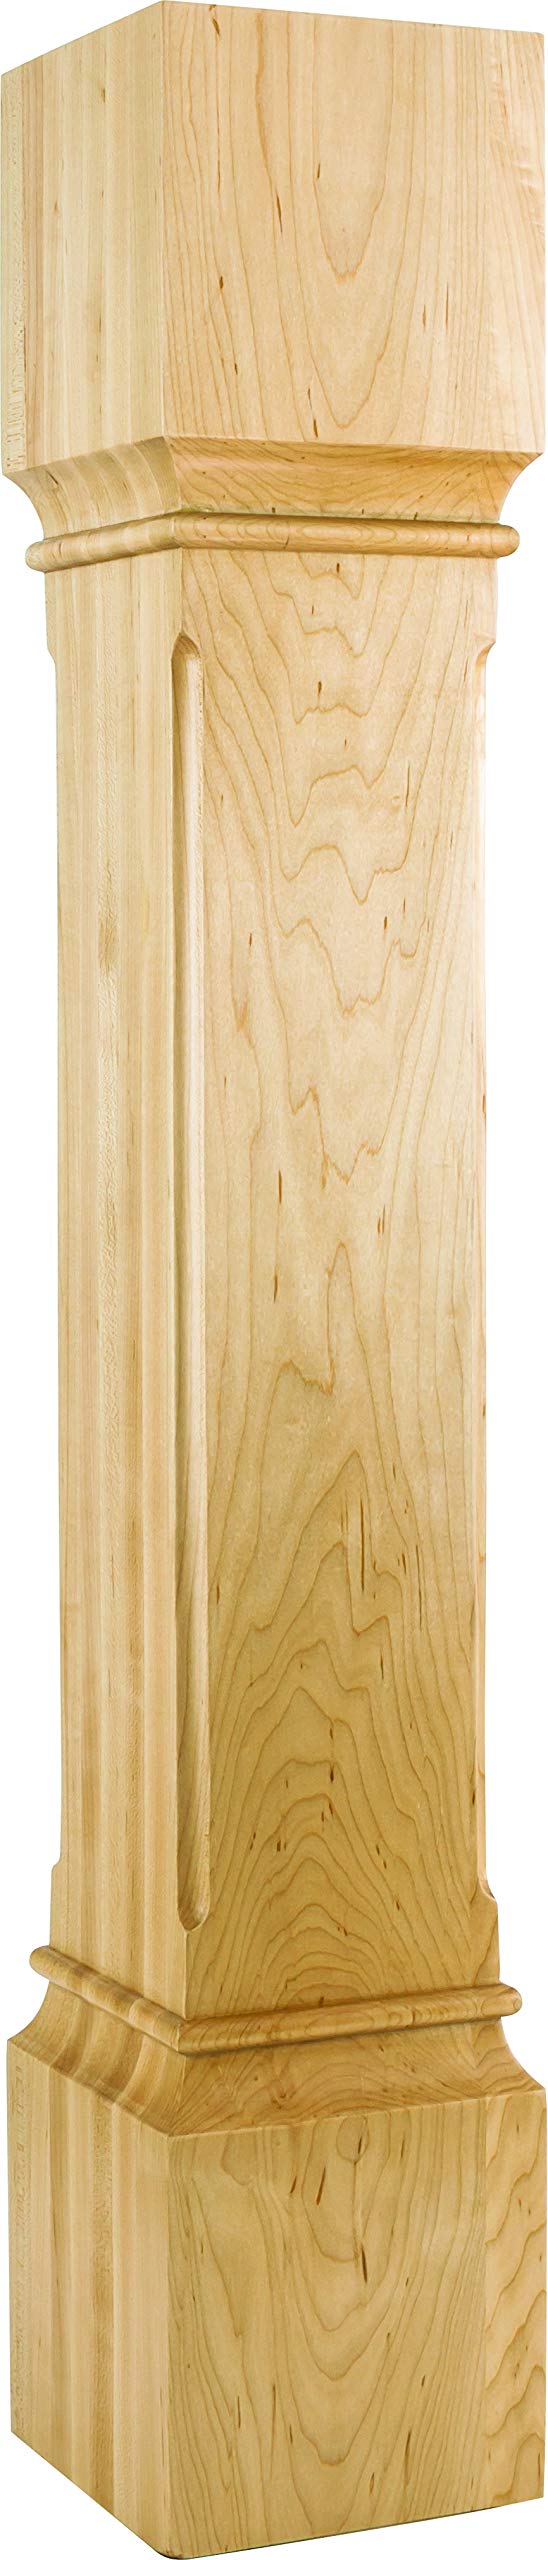 Hardware Resources P38-6-RW 6" W x 6" D x 35-1/2" H Rubberwood Fluted Edge Post